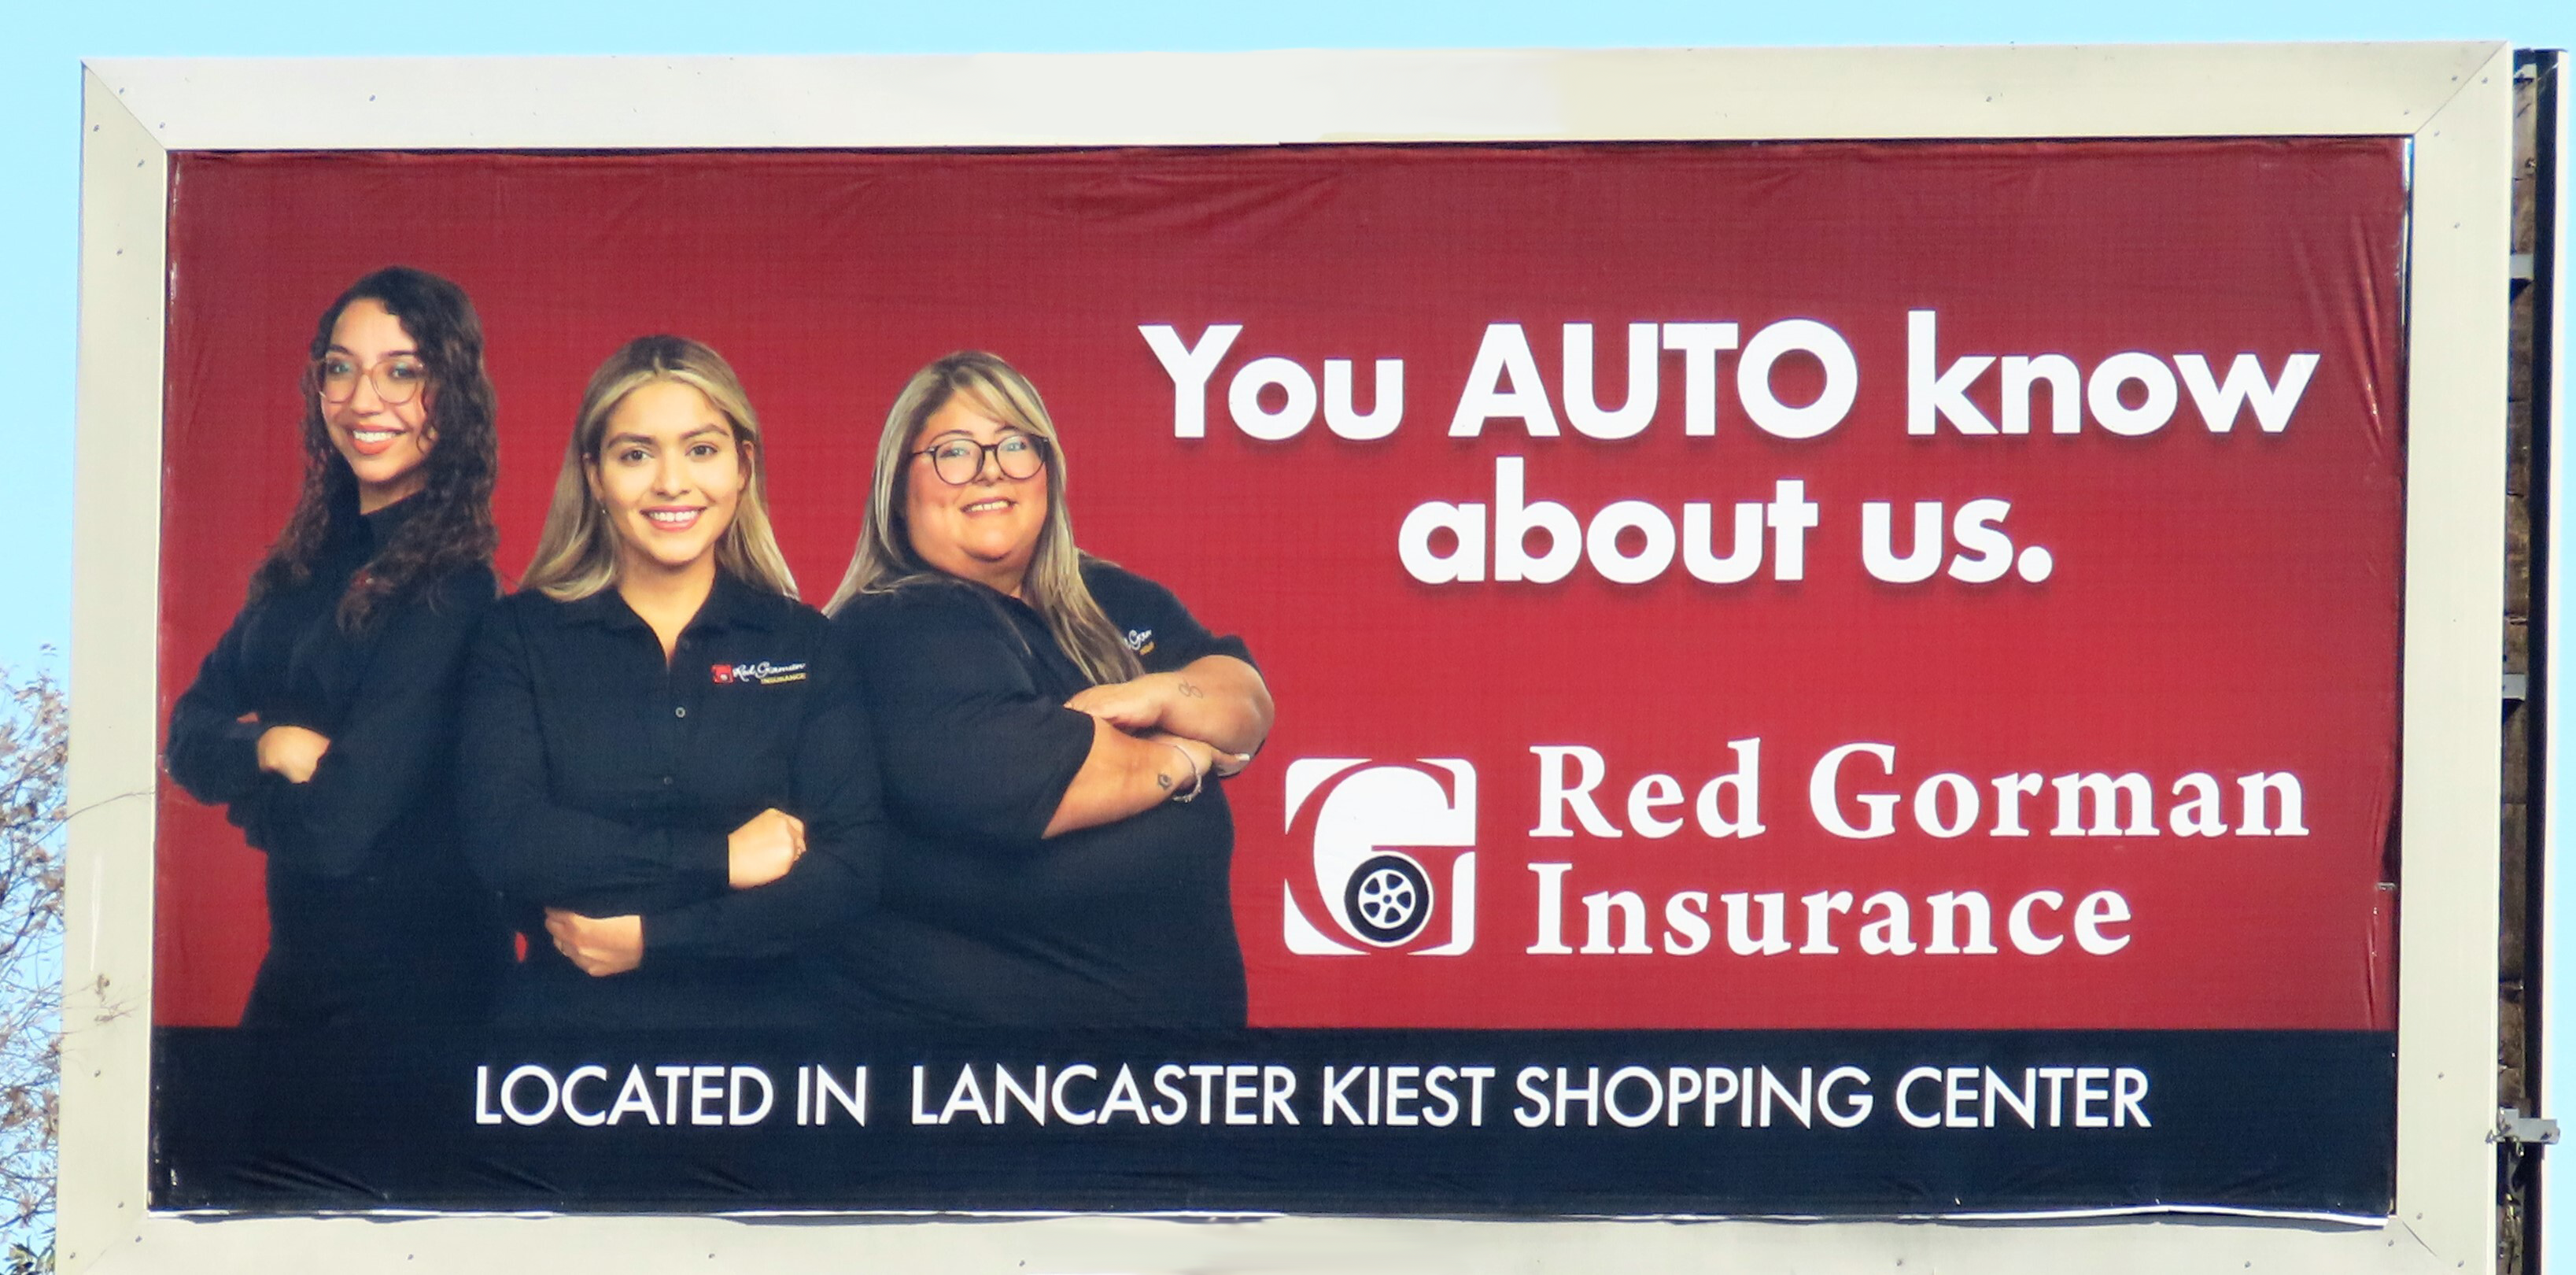 Sales Tip: OOH Ads for Insurance, Agents and Brokers Generate High Awareness and Action